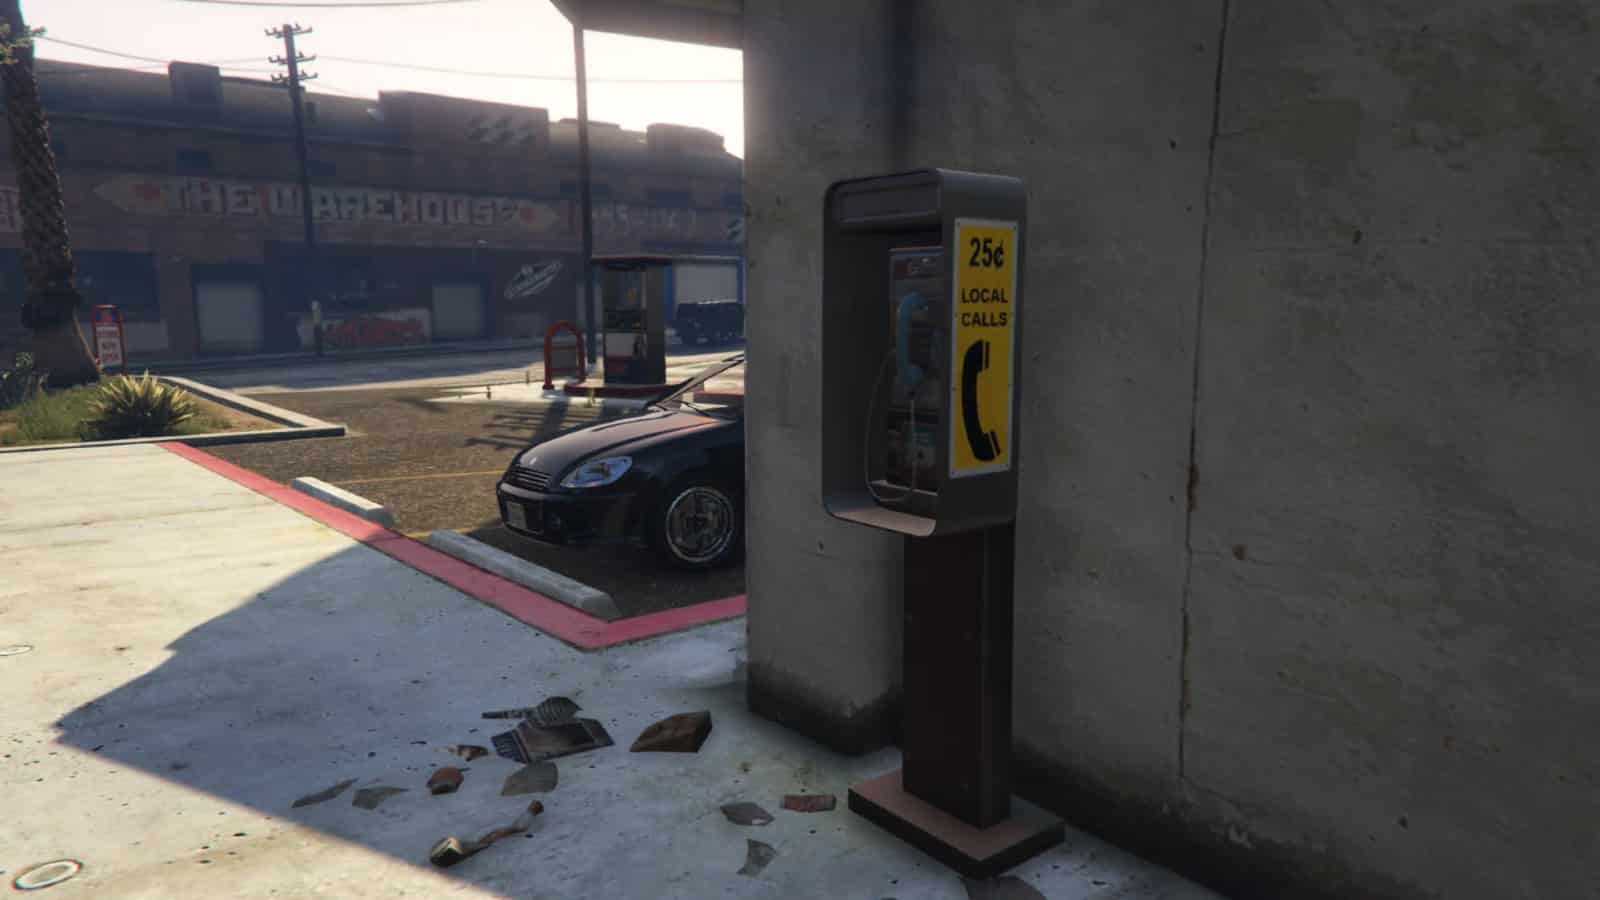 GTA Online's Payphone hits are the key to racking up fast cash